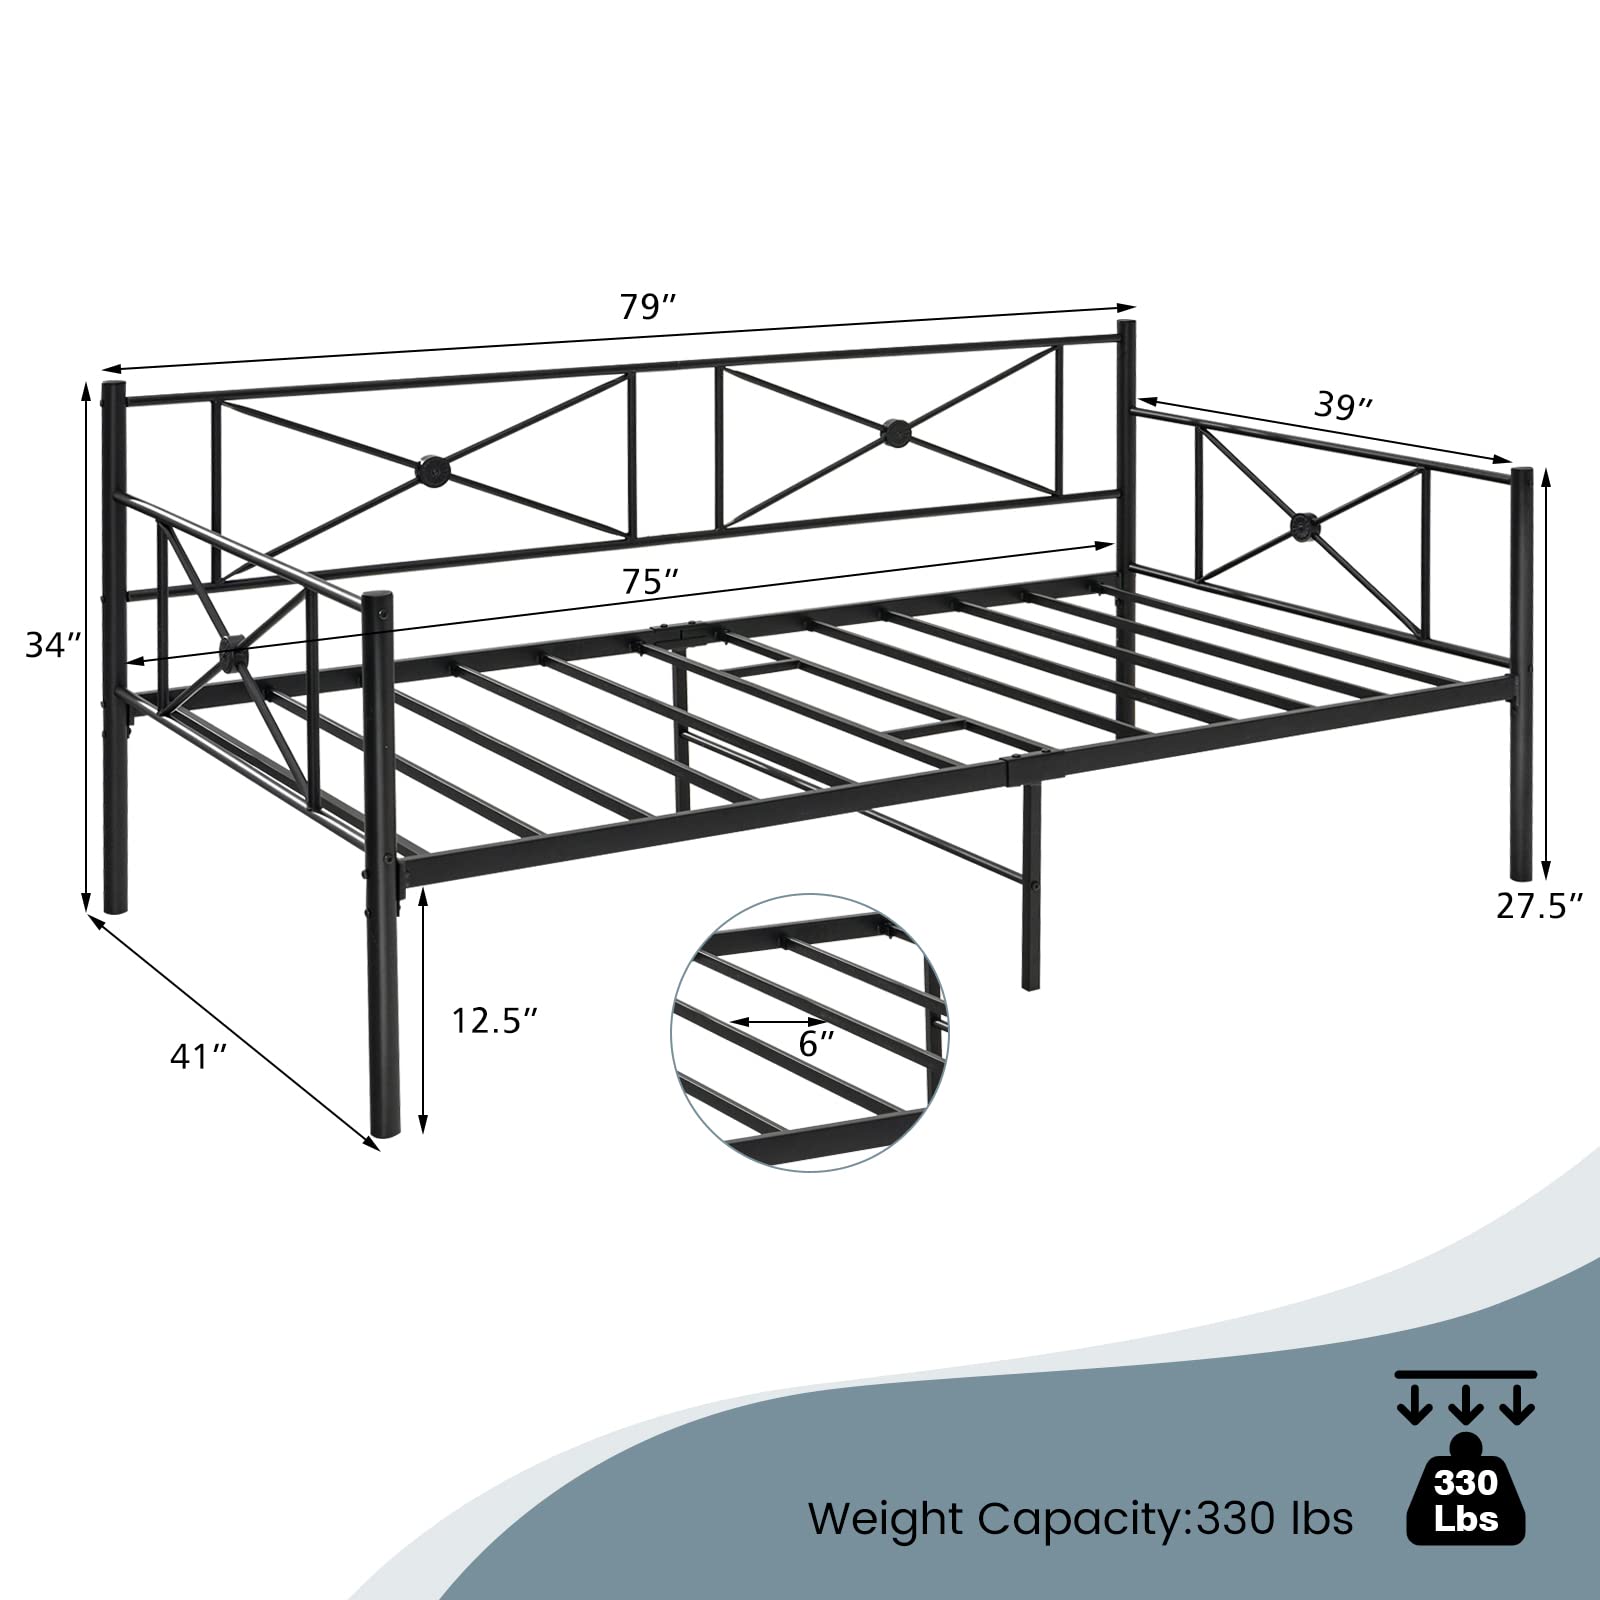 Giantex Metal Daybed Frame Twin Size, for Living Room Bedroom Guest Room, Easy Assembly, Black & White